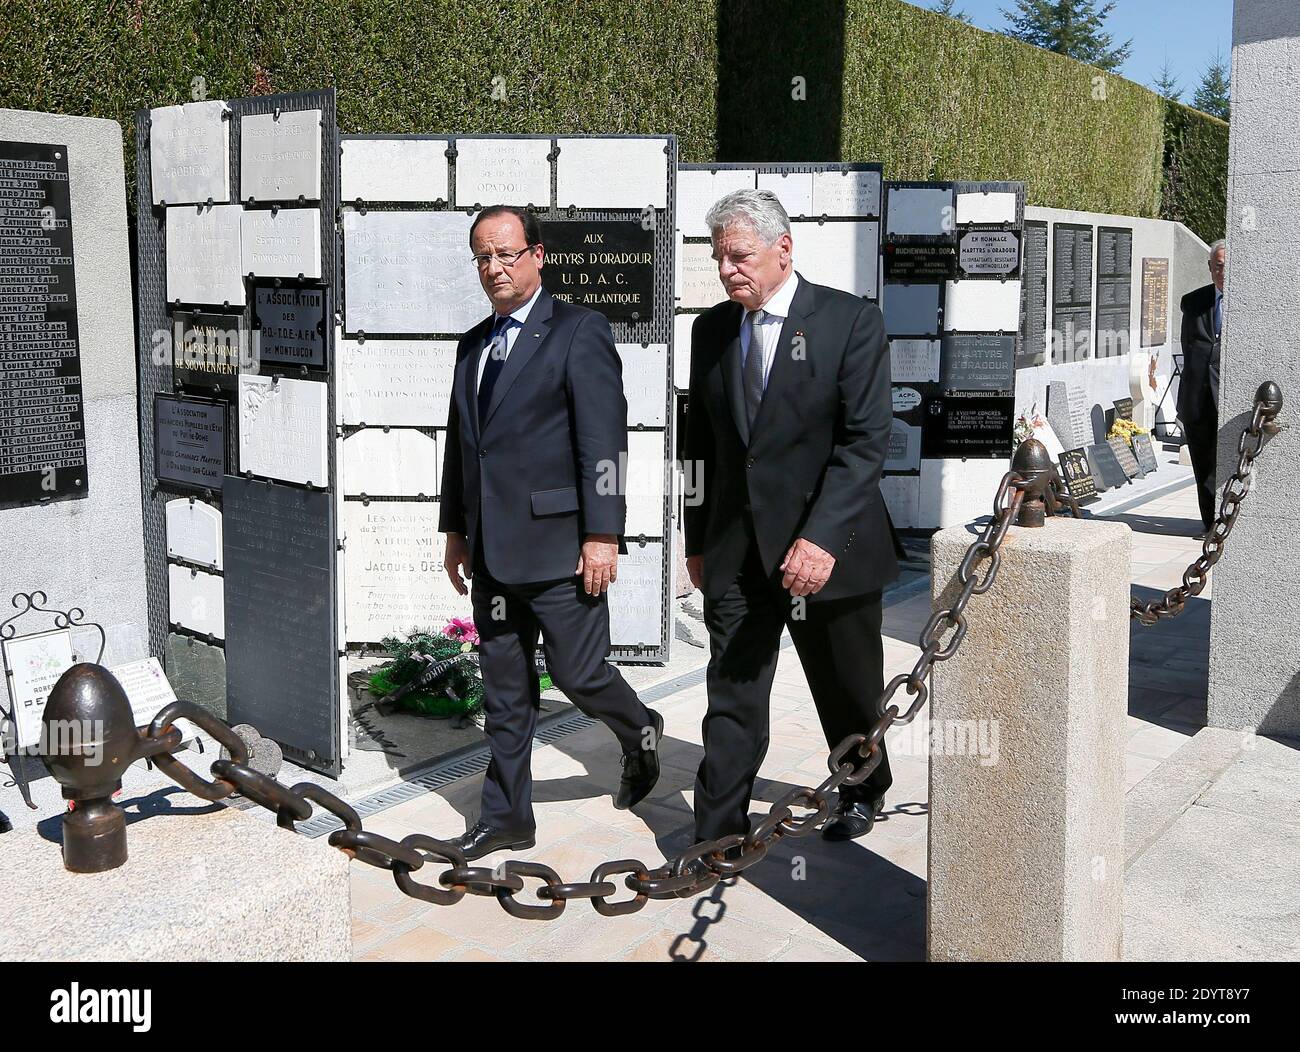 French President Francois Hollande (L) and German President Joachim Gauck are pictured at the memorial site in Oradour-sur-Glane, France on September 4, 2013. A unit of SS officers murdered 642 citizens of the town during World War II in June 1944. The German President is on a three-day visit to France. Photo by Patrick Bernard/ABACAPRESS.COM Stock Photo